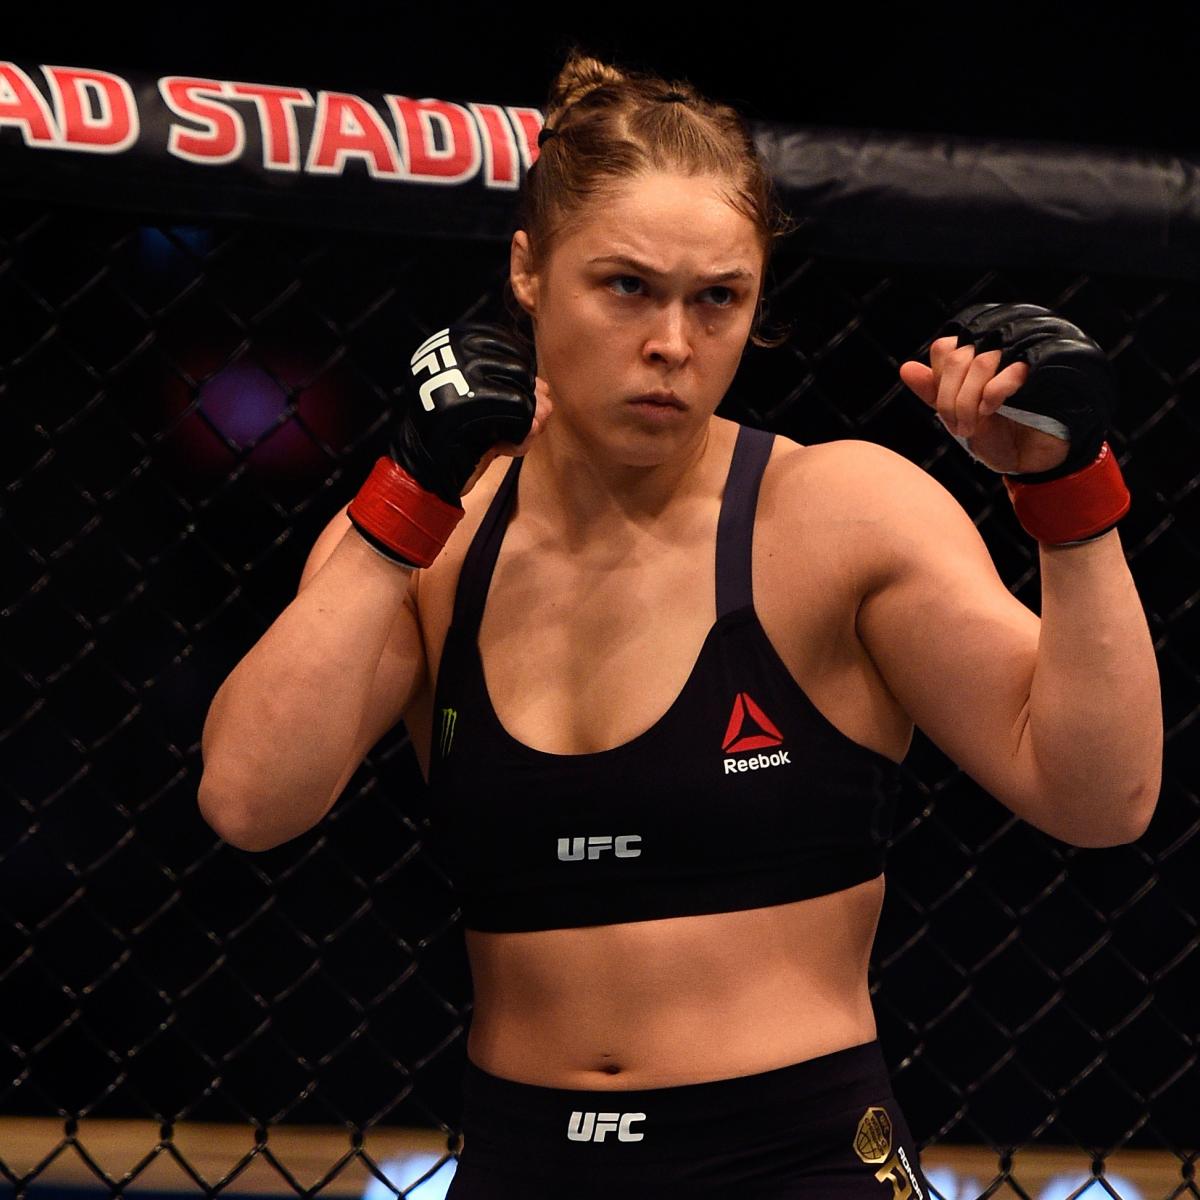 Can A Refreshed Ronda Rousey Reclaim Her Ufc Throne Against Amanda